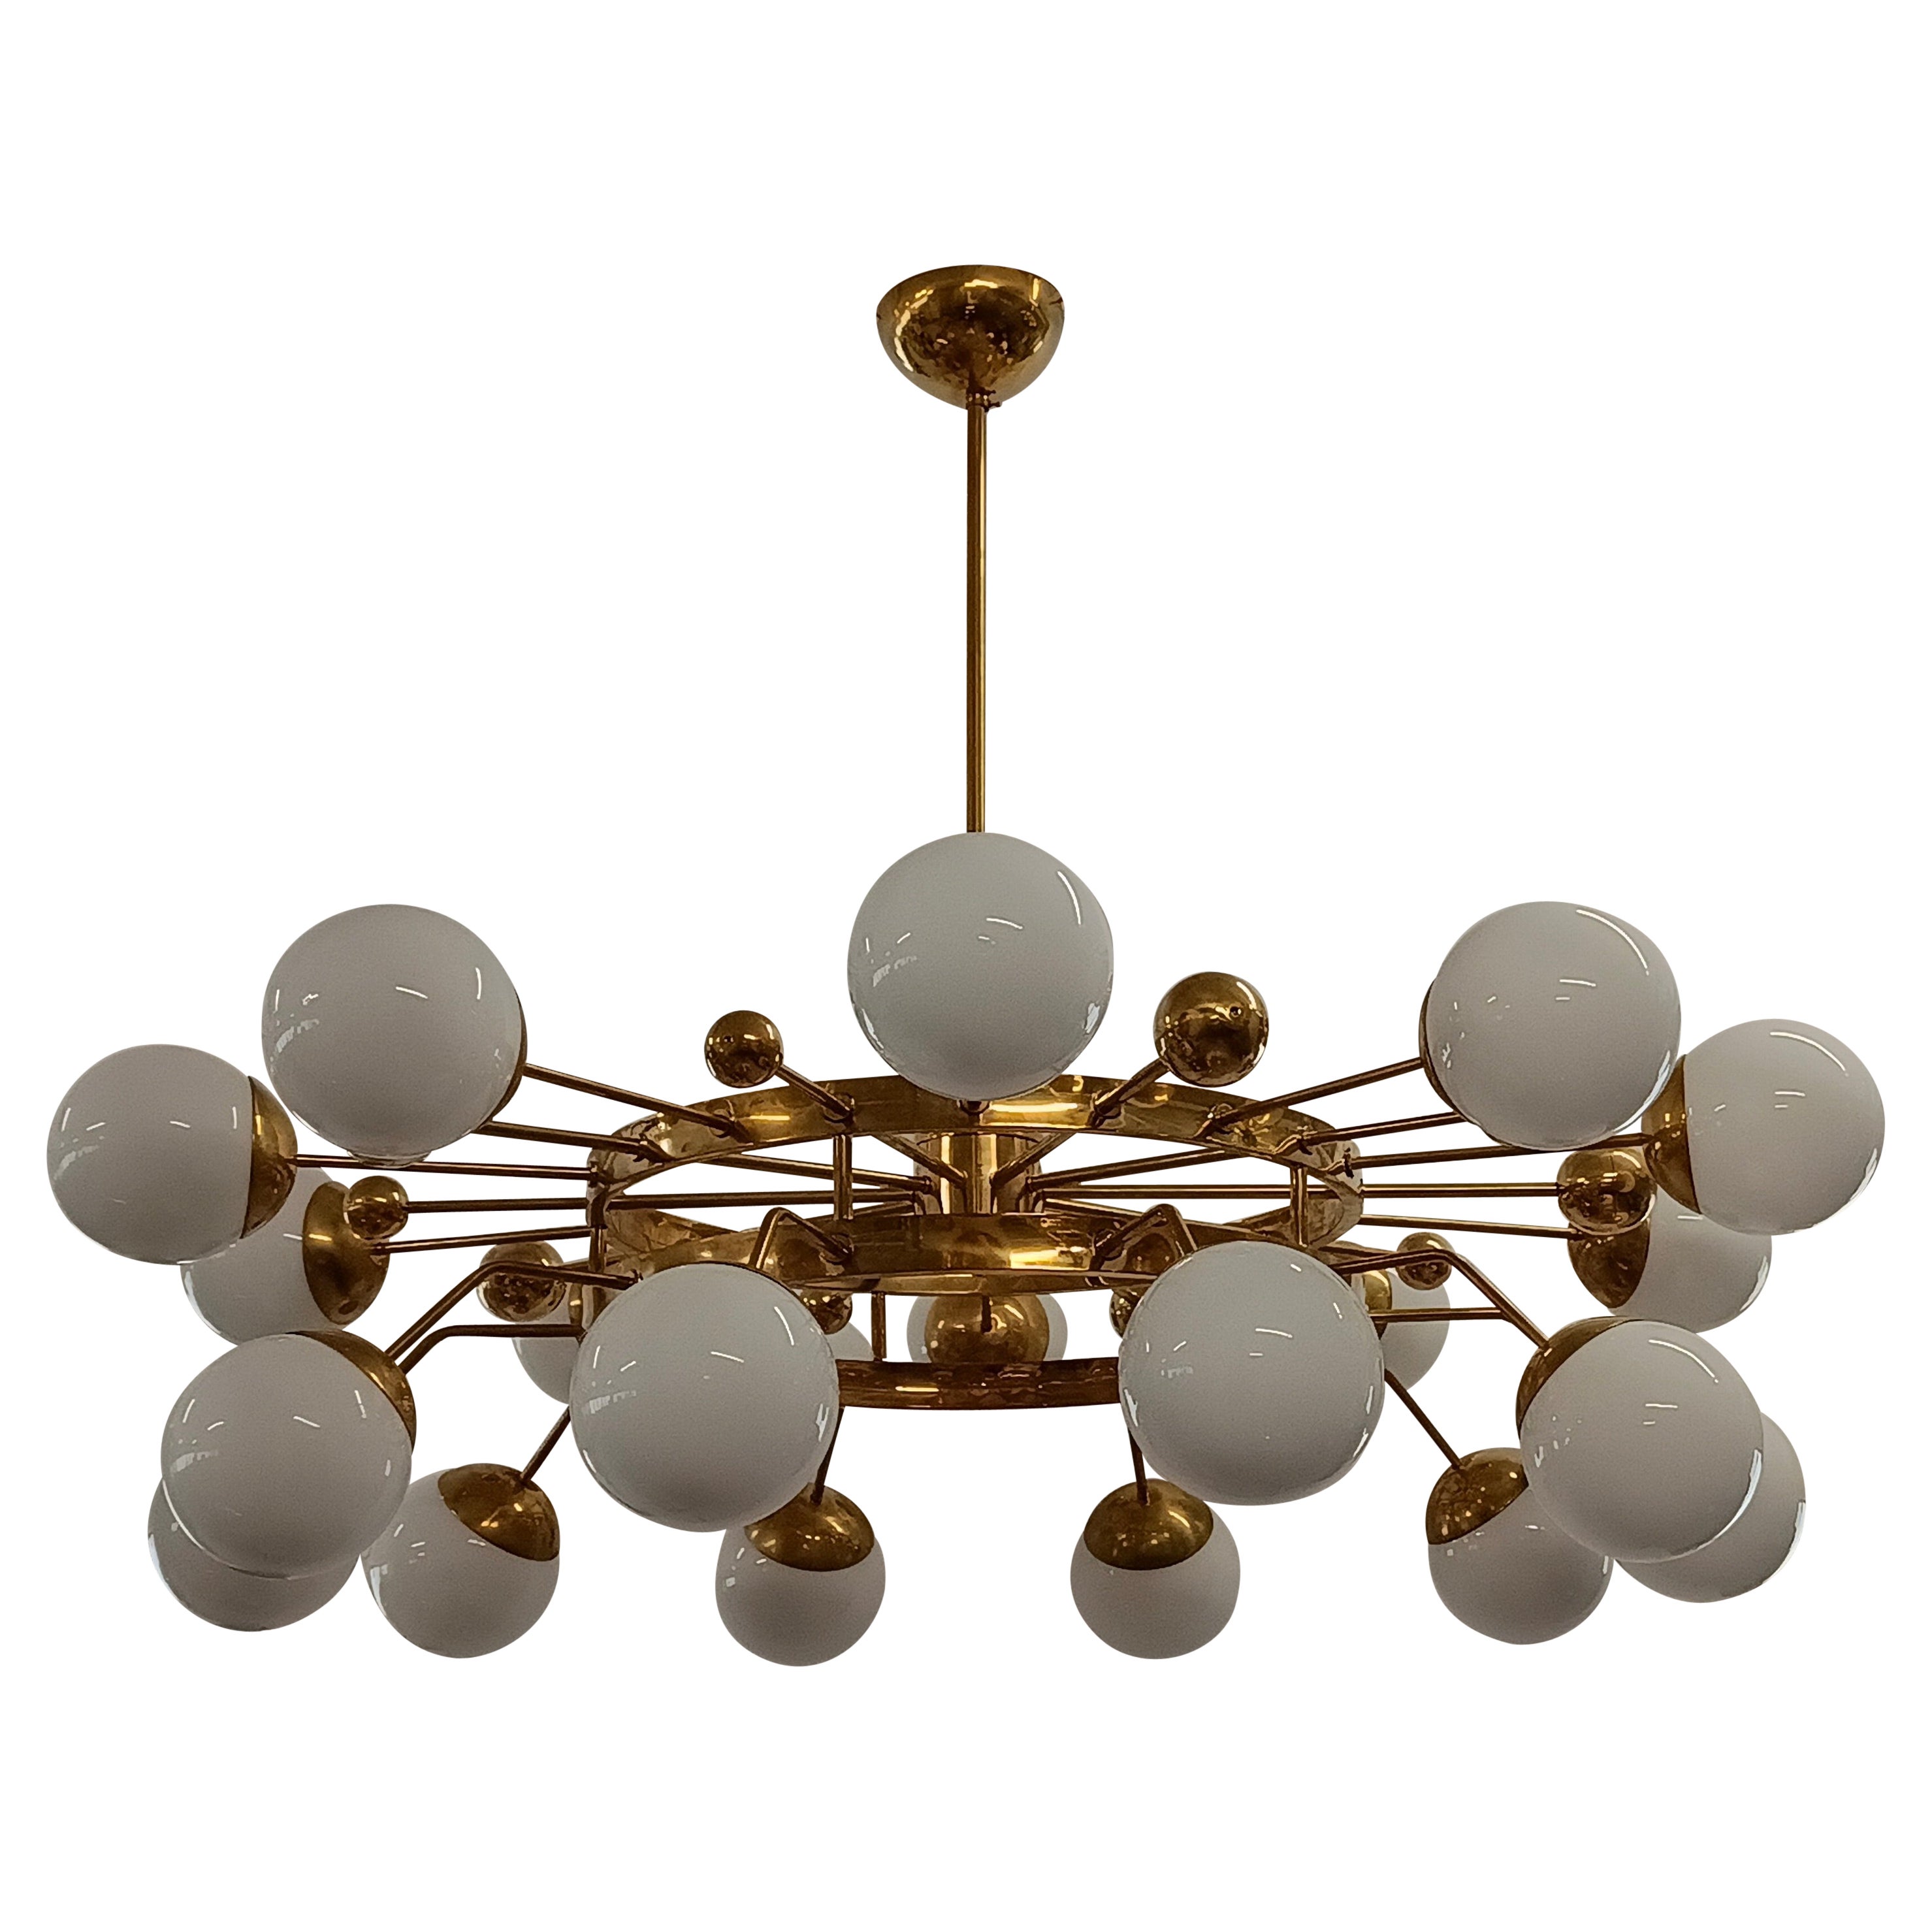 Murano Art Glass and Brass Midcentury Chandelier, 2000 For Sale